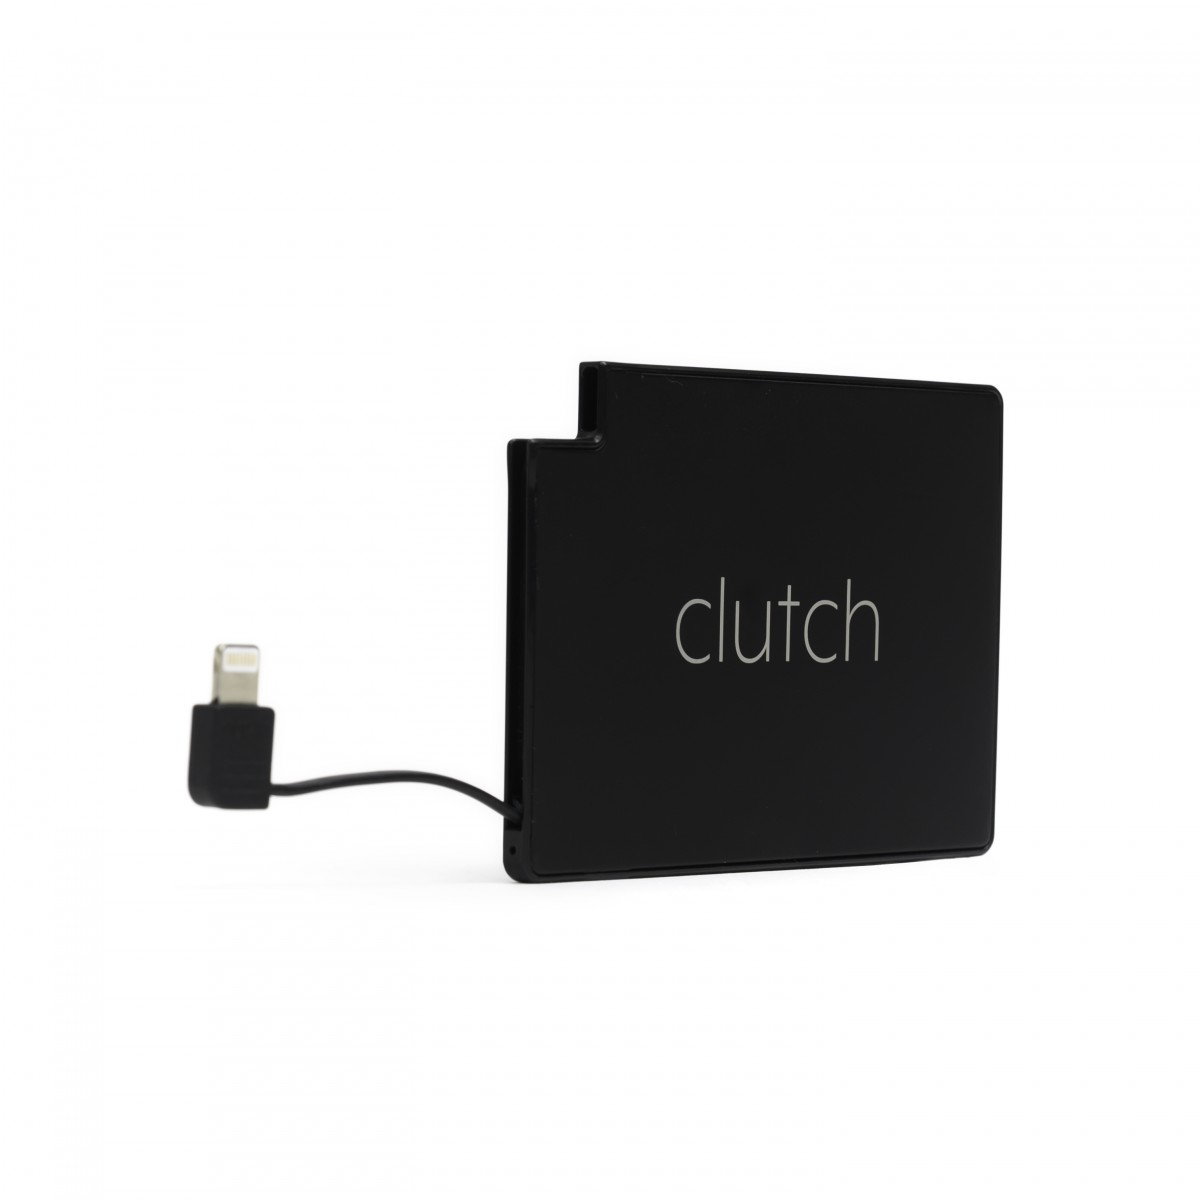 clutch charger power bank review